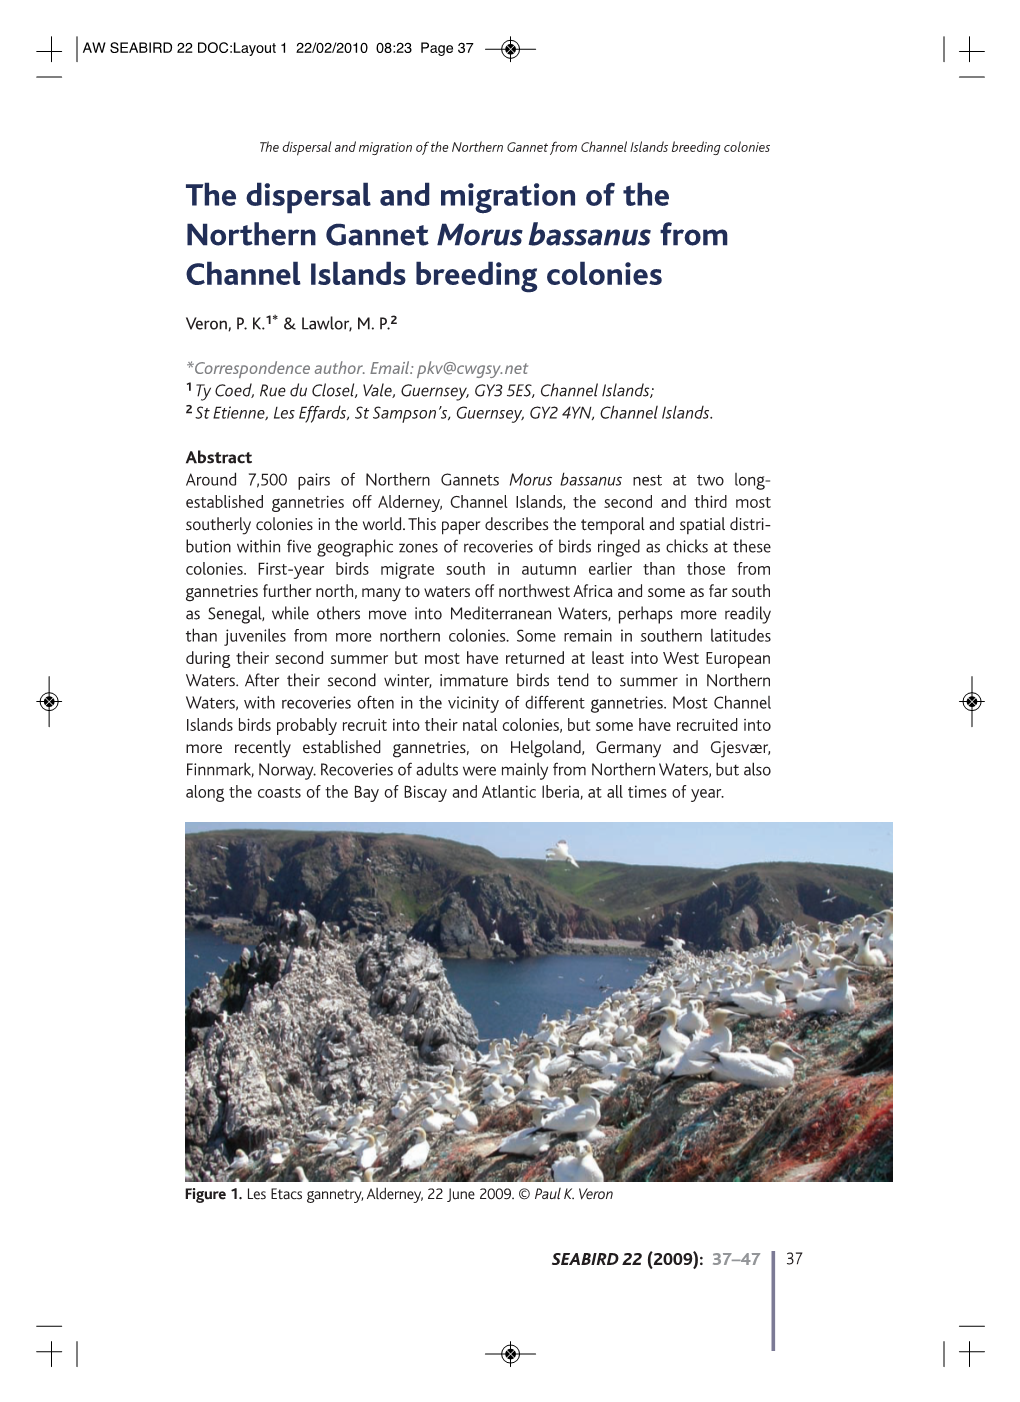 The Dispersal and Migration of the Northern Gannet Morus Bassanus from Channel Islands Breeding Colonies